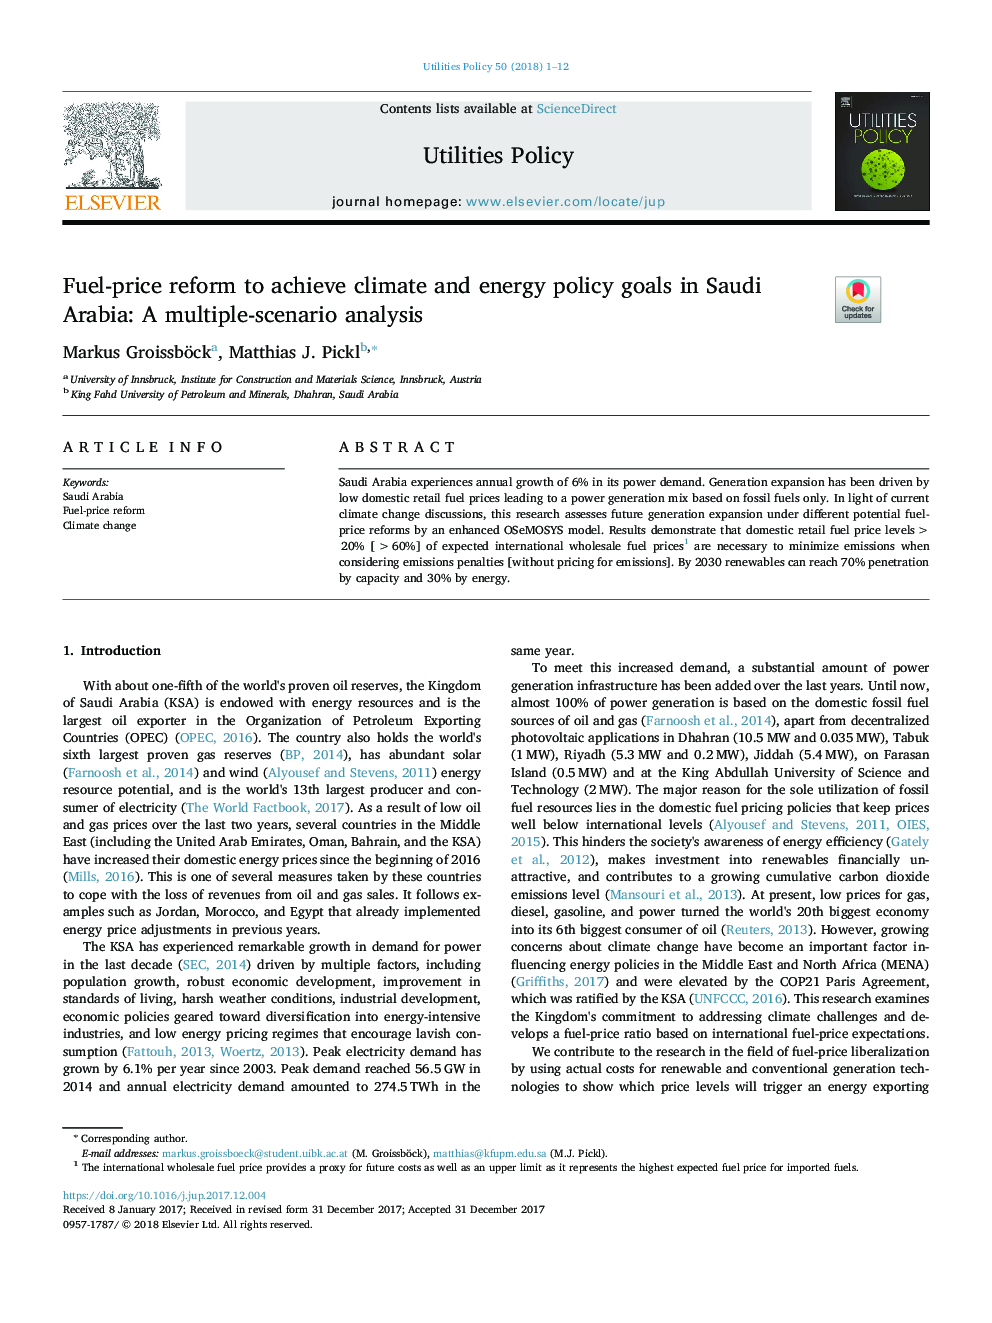 Fuel-price reform to achieve climate and energy policy goals in Saudi Arabia: A multiple-scenario analysis